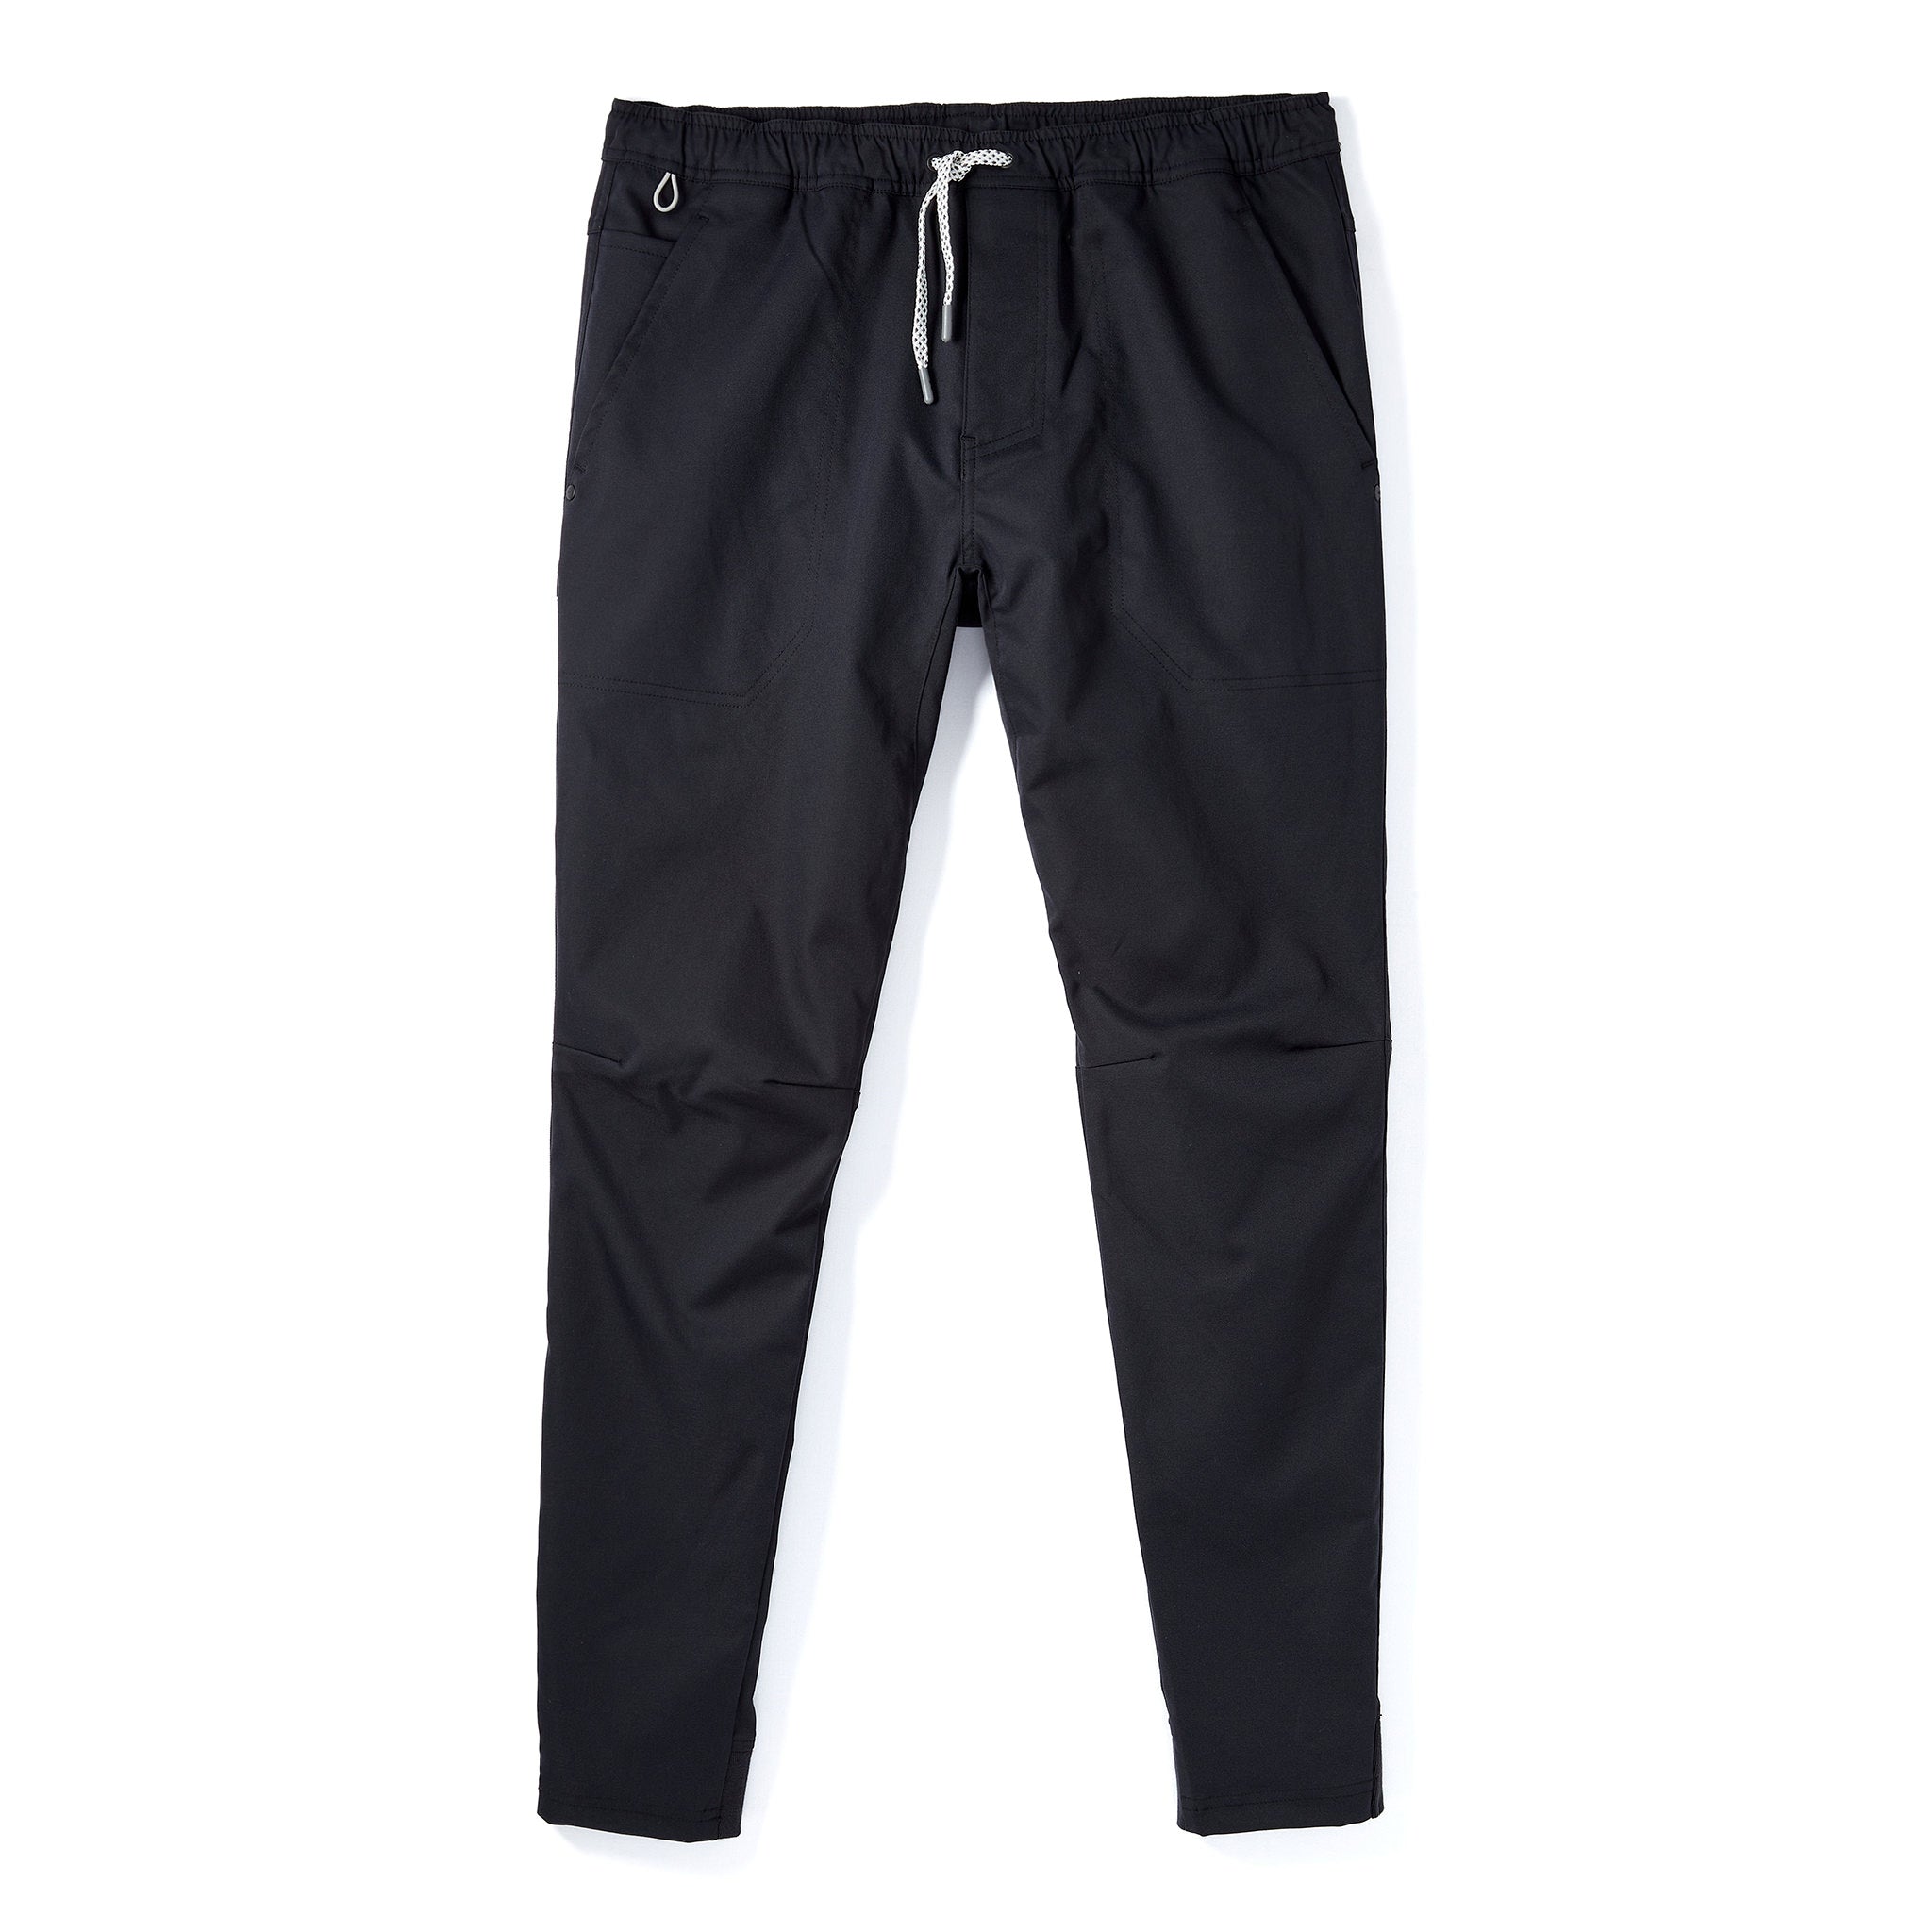 Tour Jogger in Black, Travel and Work Pants, Myles Apparel